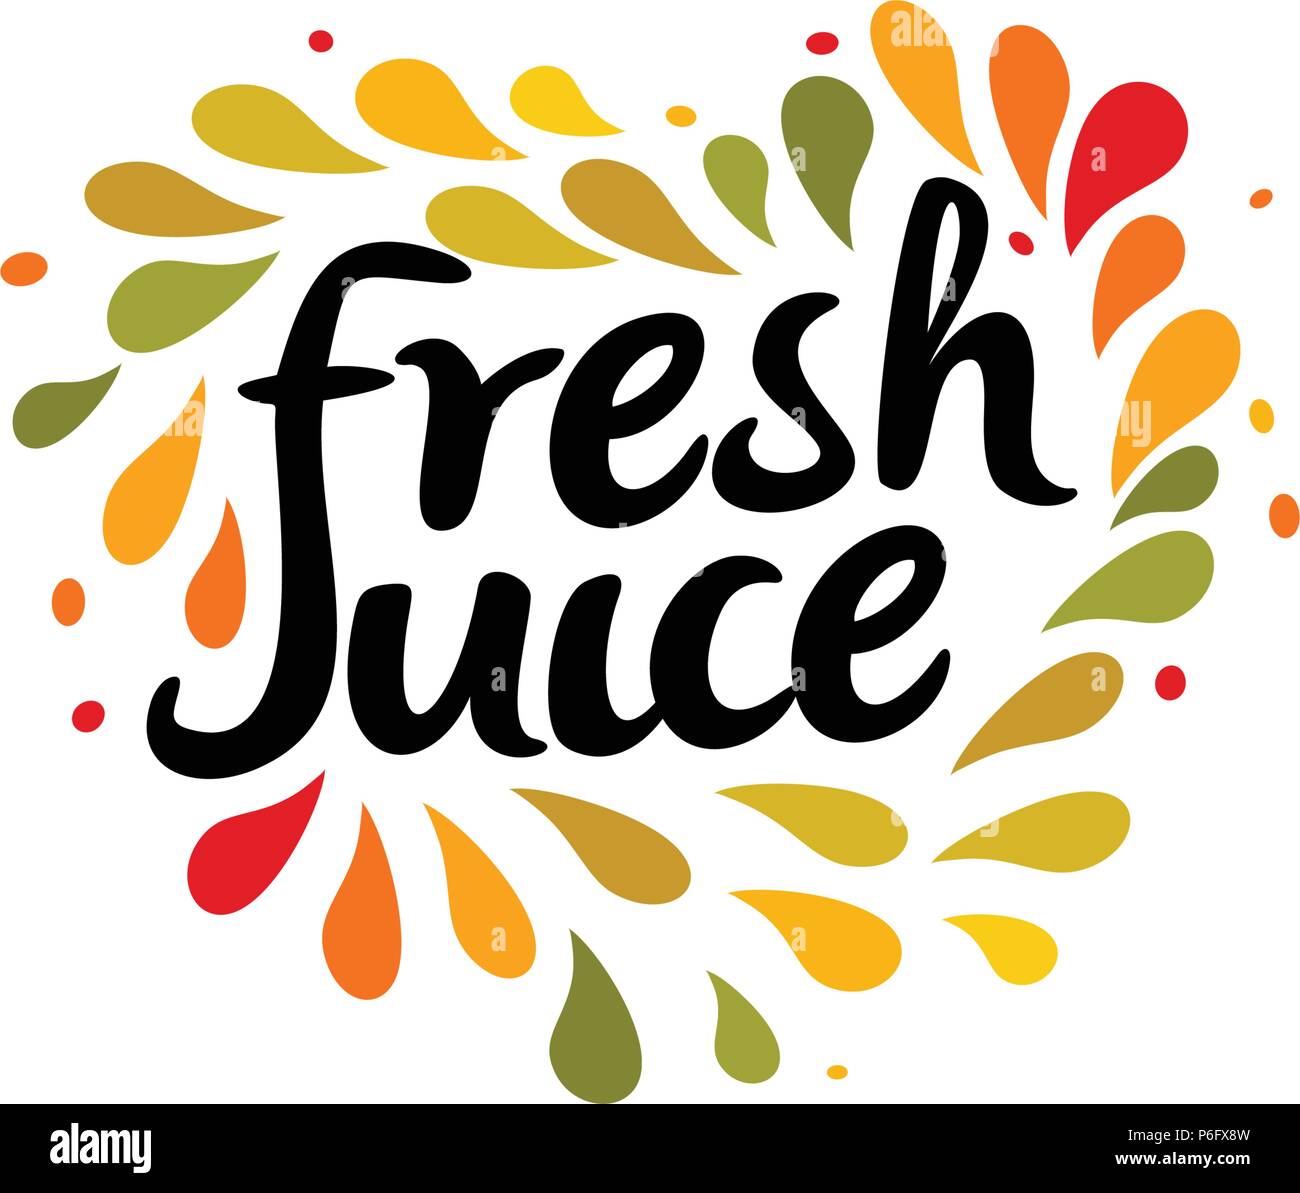 Fresh juice emblem. Colorful juice drops splashed around the heart shape with text inside on white background. Modern fun style logo template. Stock Vector